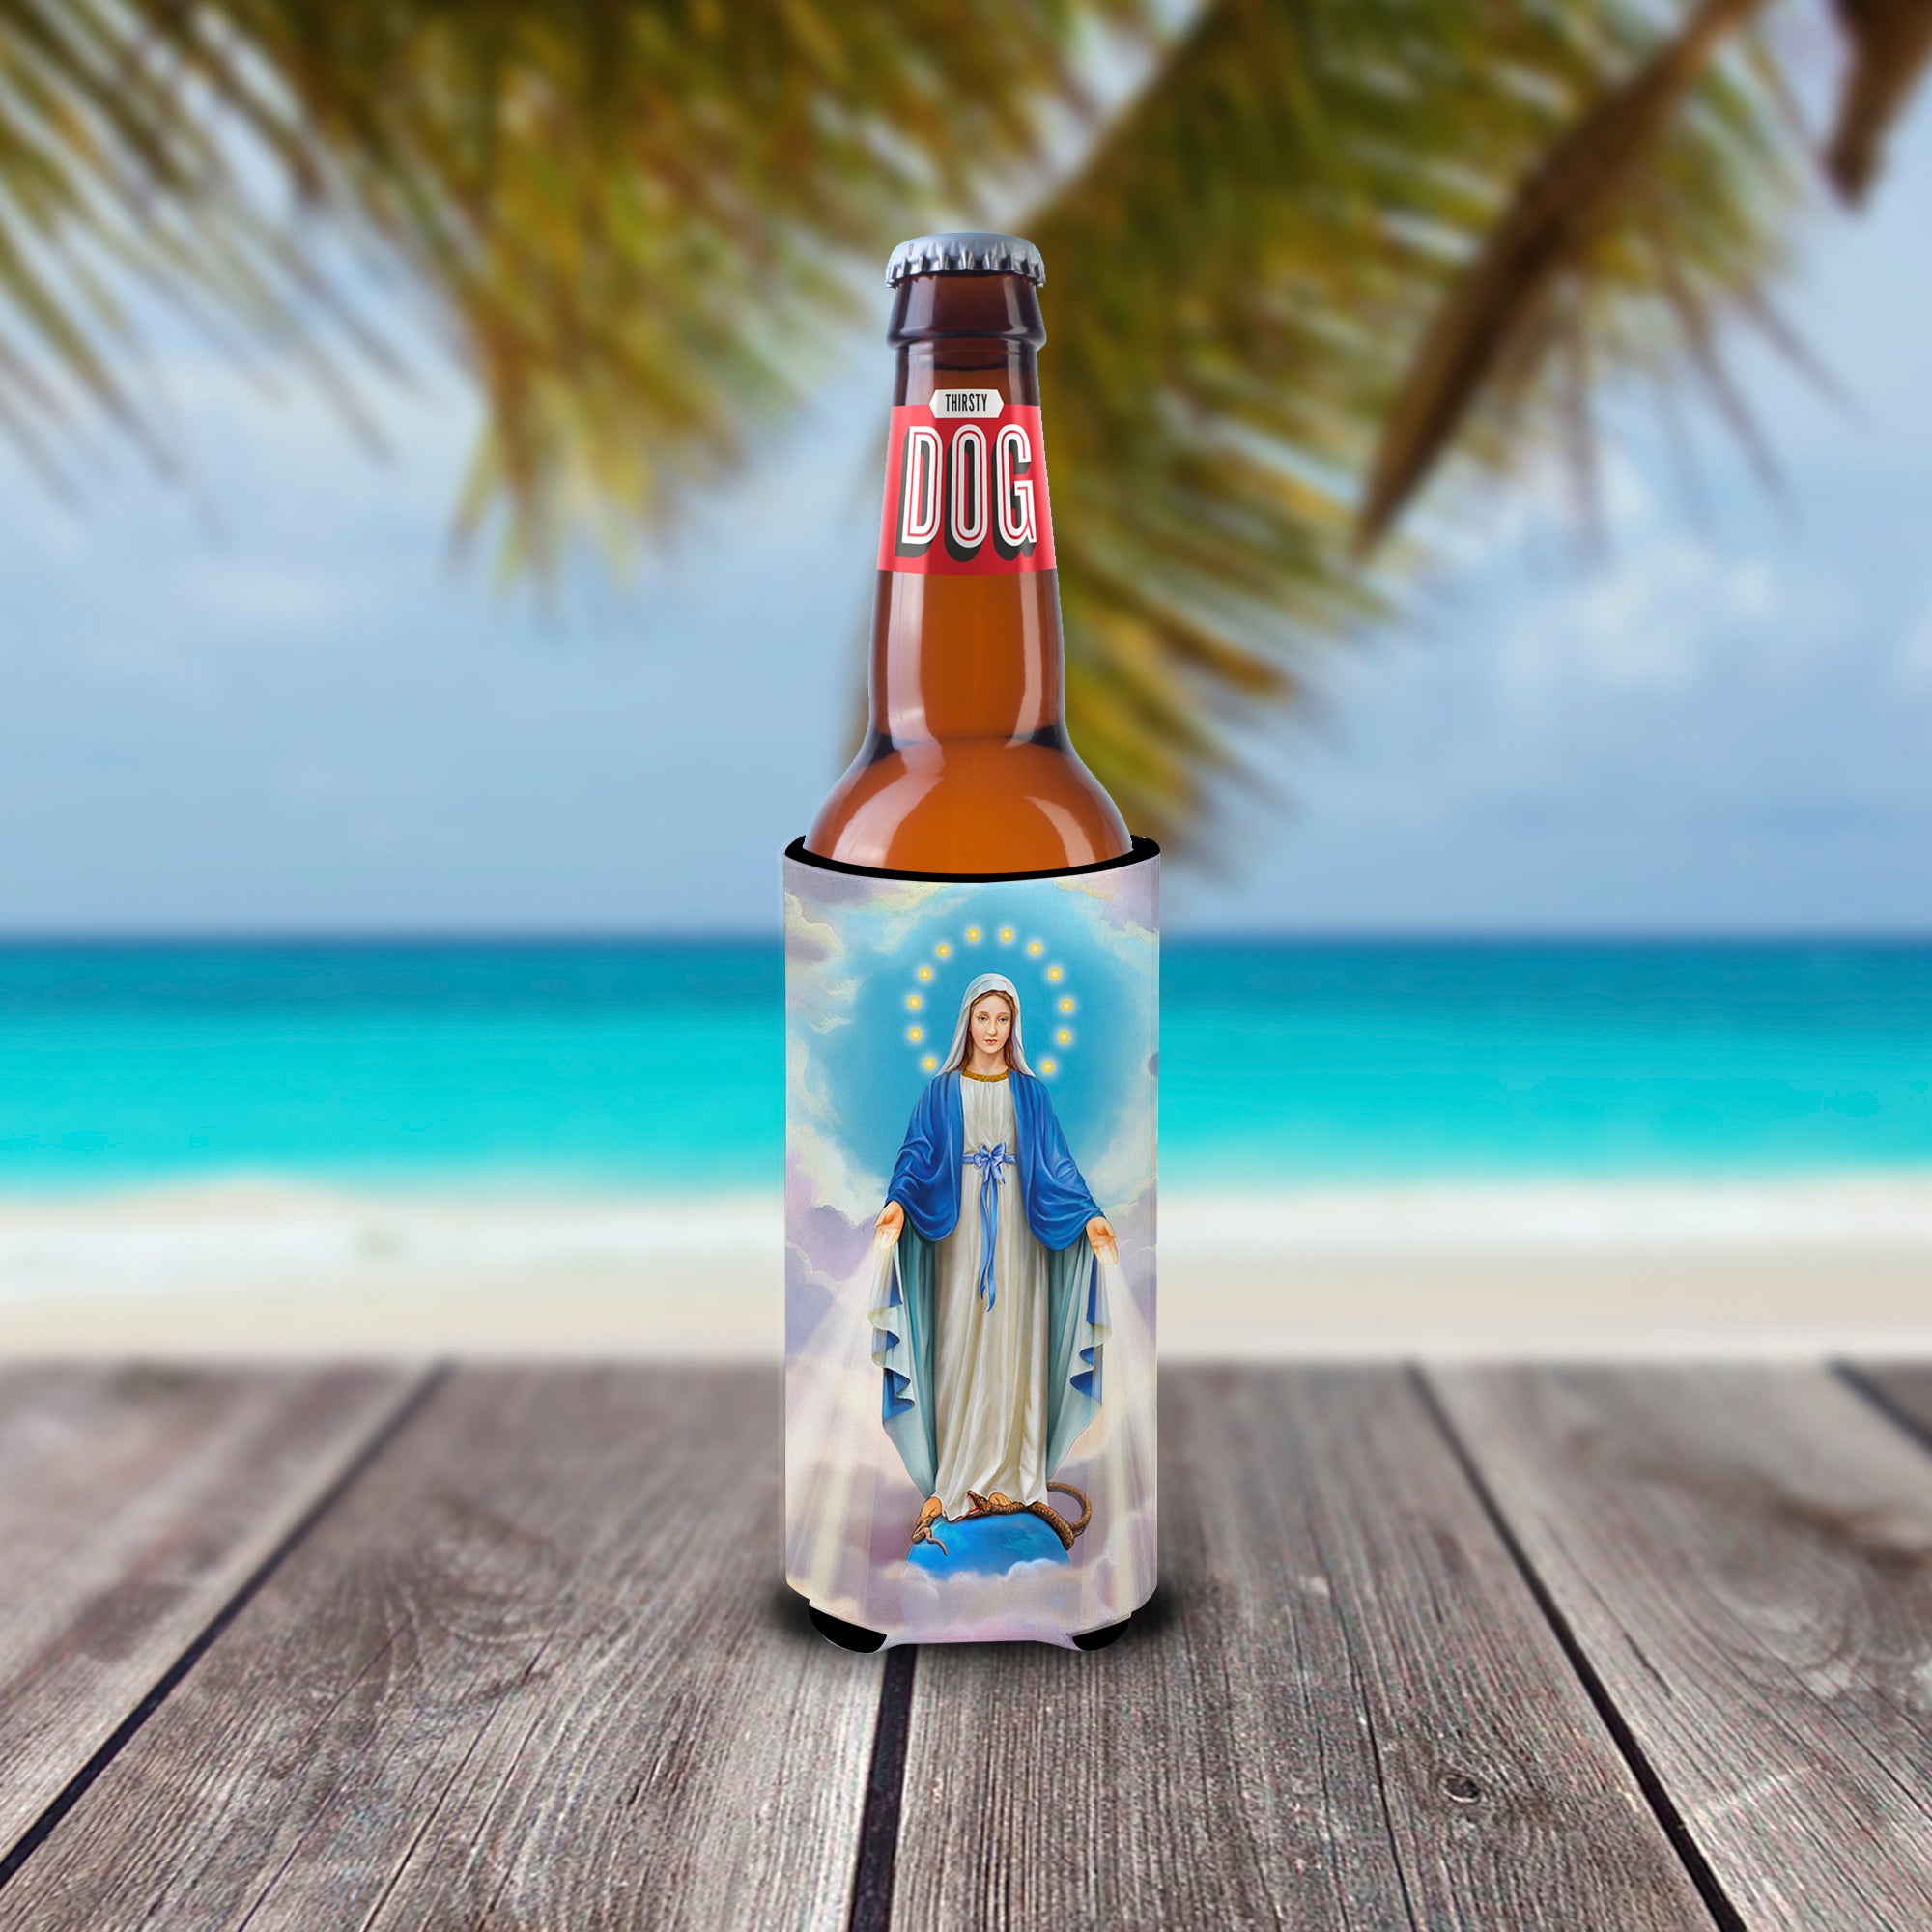 Religious Blessed Virgin Mother Mary  Ultra Beverage Insulators for slim cans APH8805MUK  the-store.com.